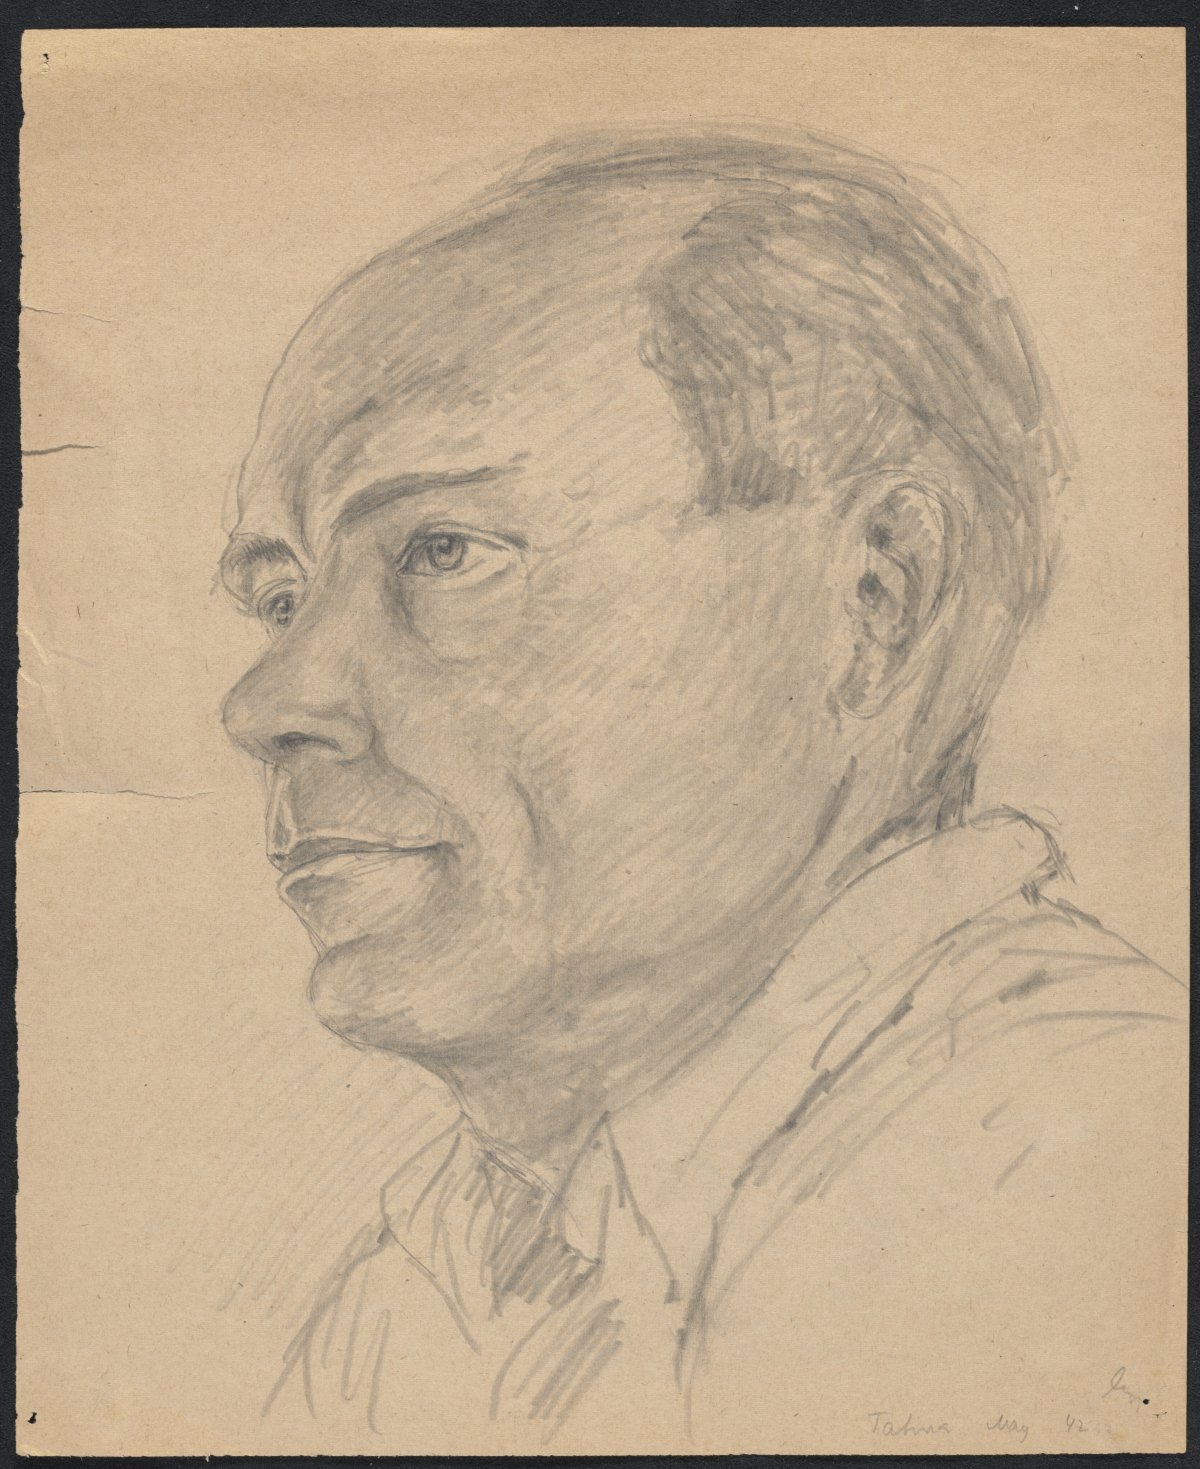 A charcoal on paper sketch of a late middle-aged man. He has a receding hairline and short hair around his temples. He is wearing a white collared shirt with the collar unbuttoned. He is in profile and staring off to the left of the page. 